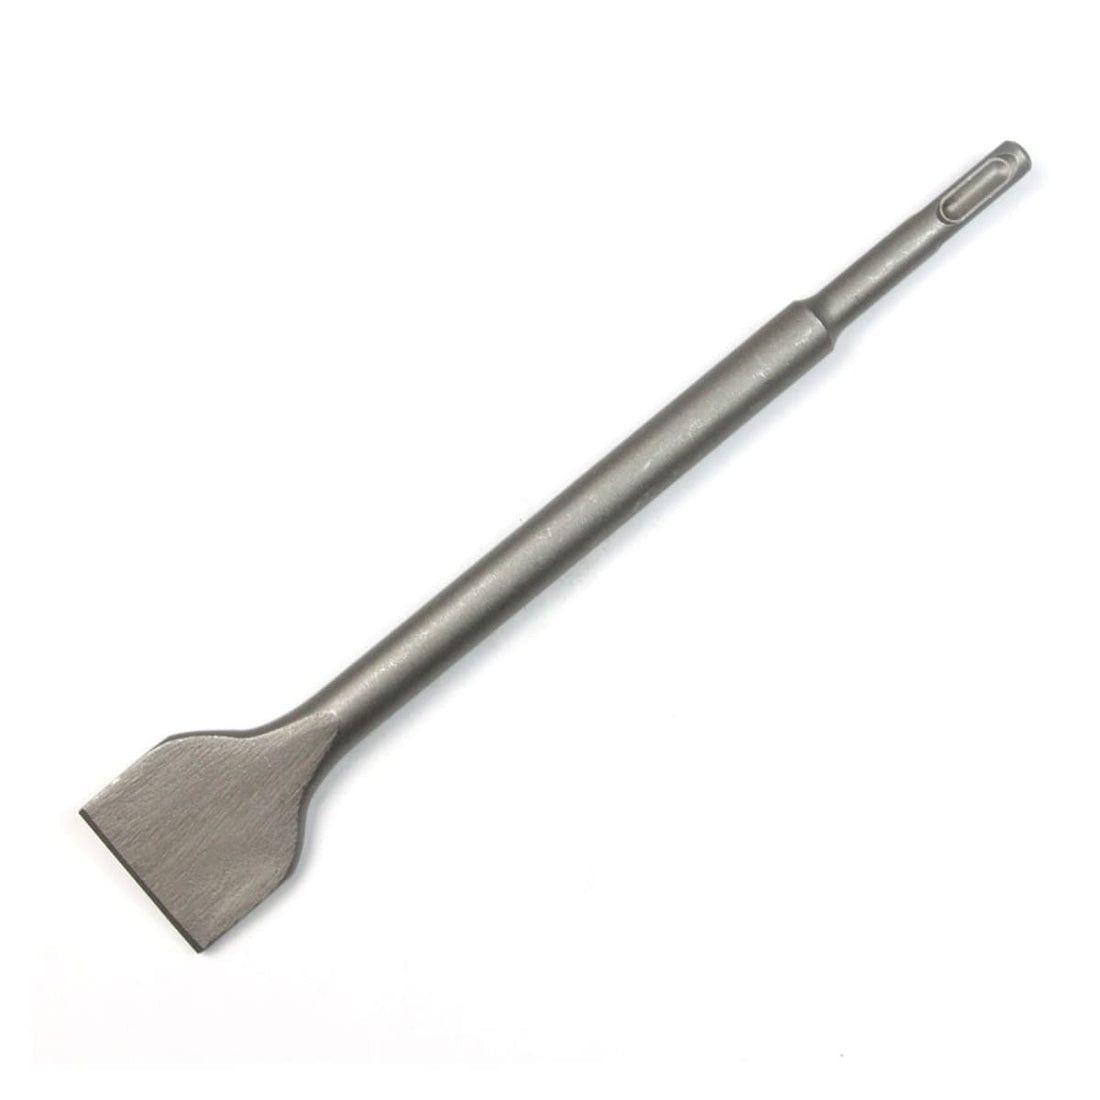 DEXTER WIDE WALL CHISEL SIZE 40X250MM, SDS CONNECTION